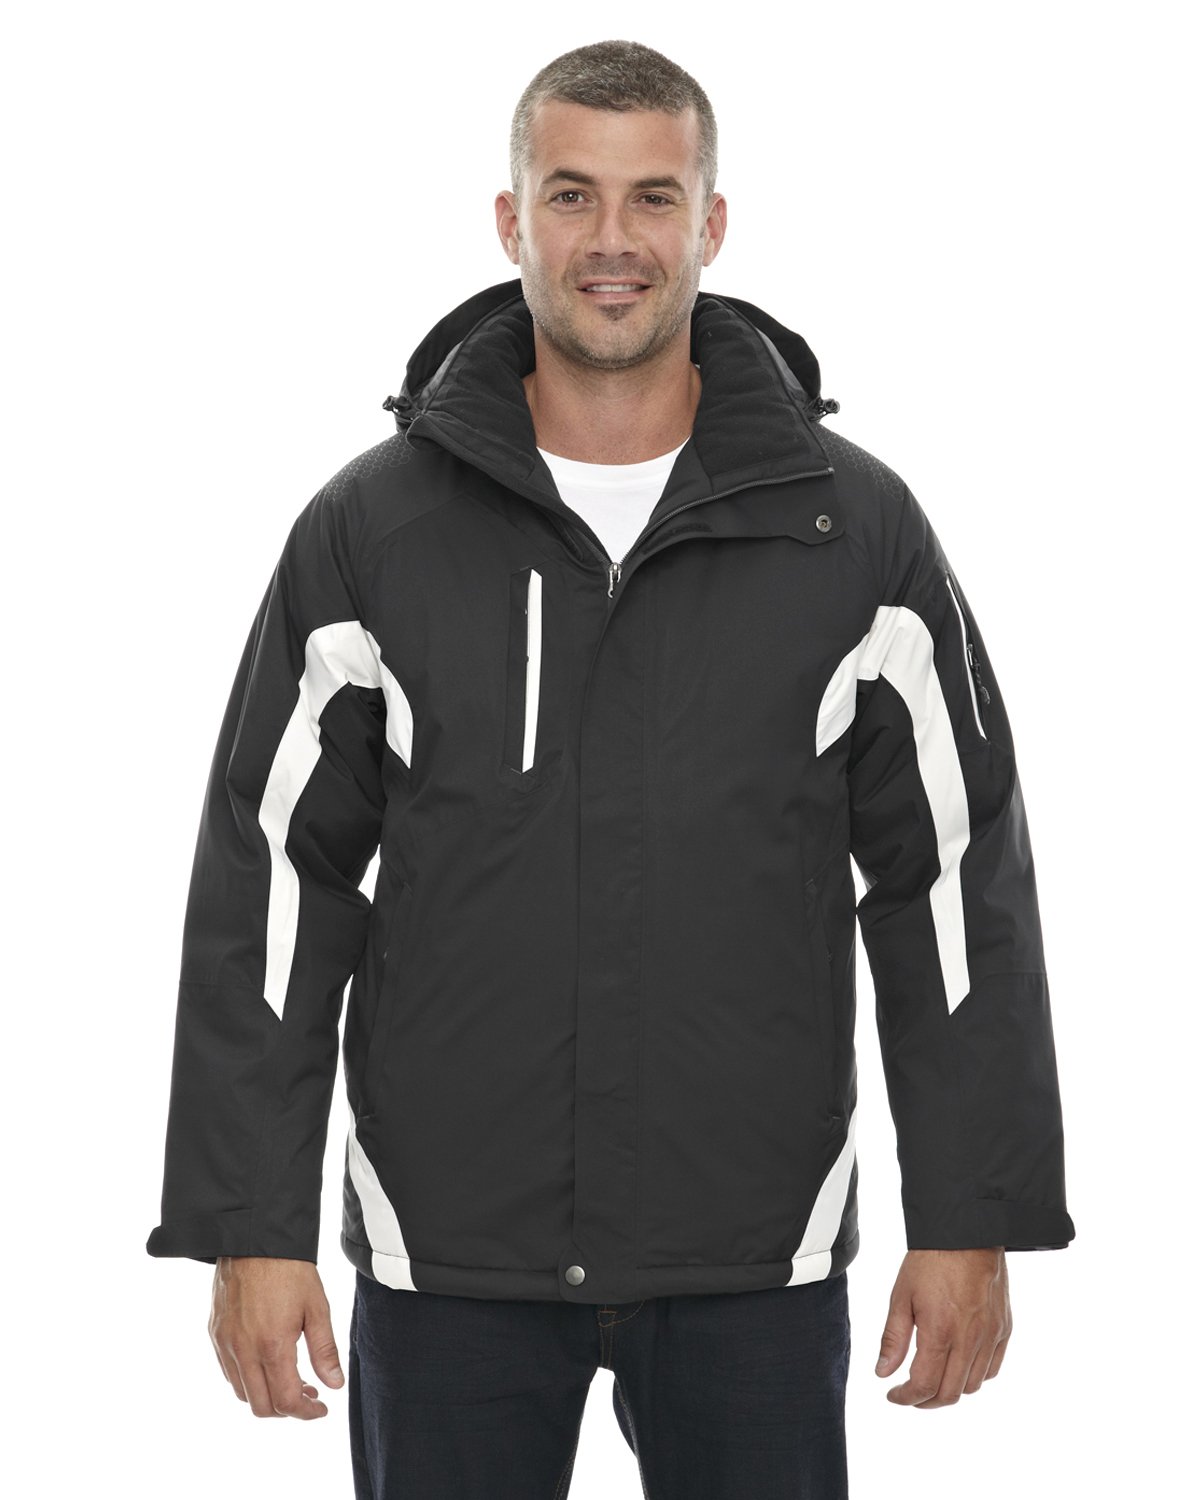 A Product of Ash City - North End Men's Apex Seam-Sealed Insulated Jacket - BLACK 703 - L [Saving and Discount on bulk, Code Christo] - image 1 of 2